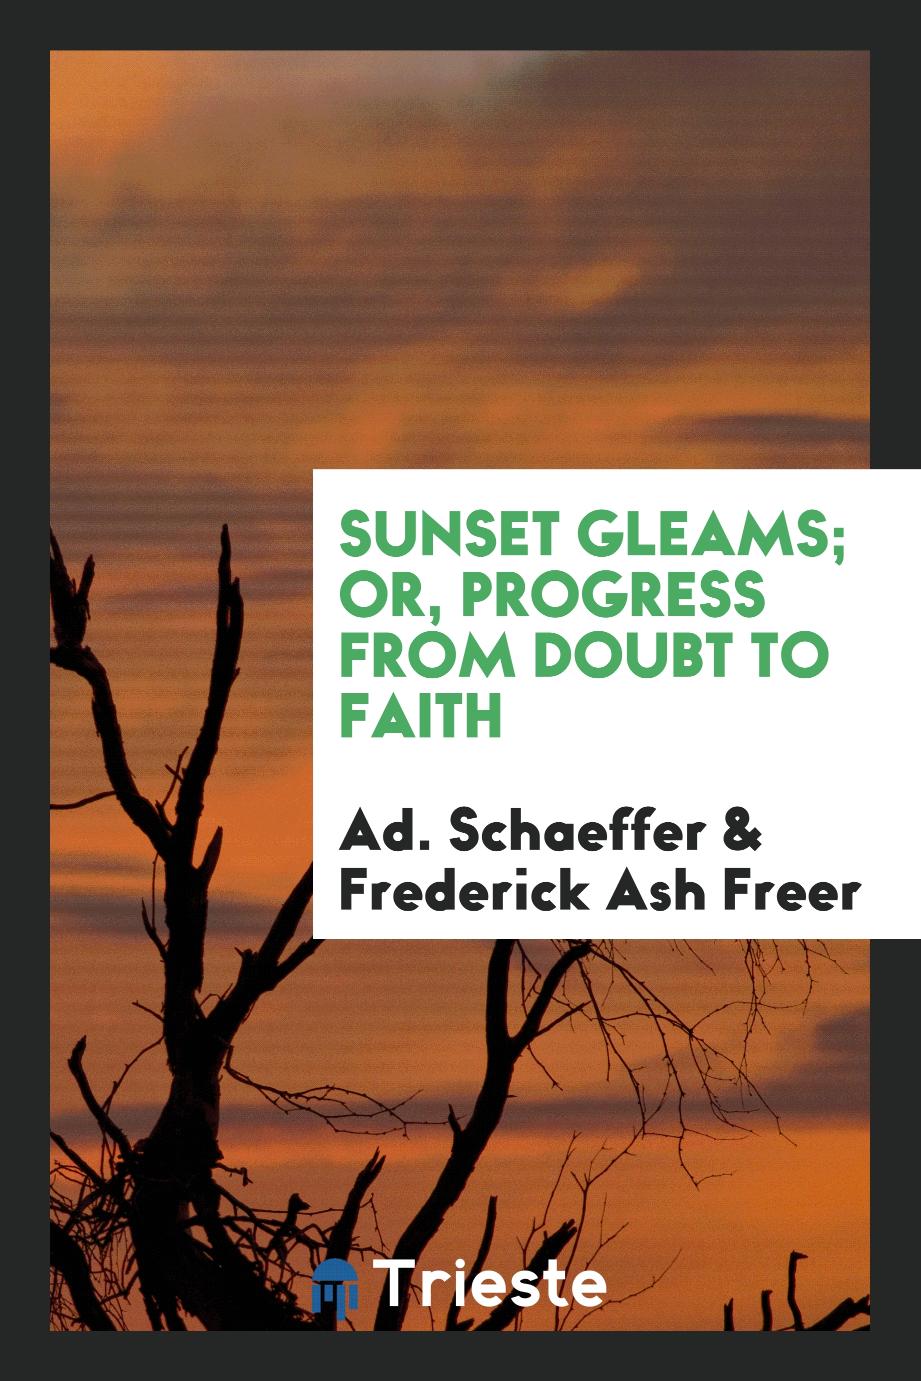 Sunset Gleams; Or, Progress from Doubt to Faith